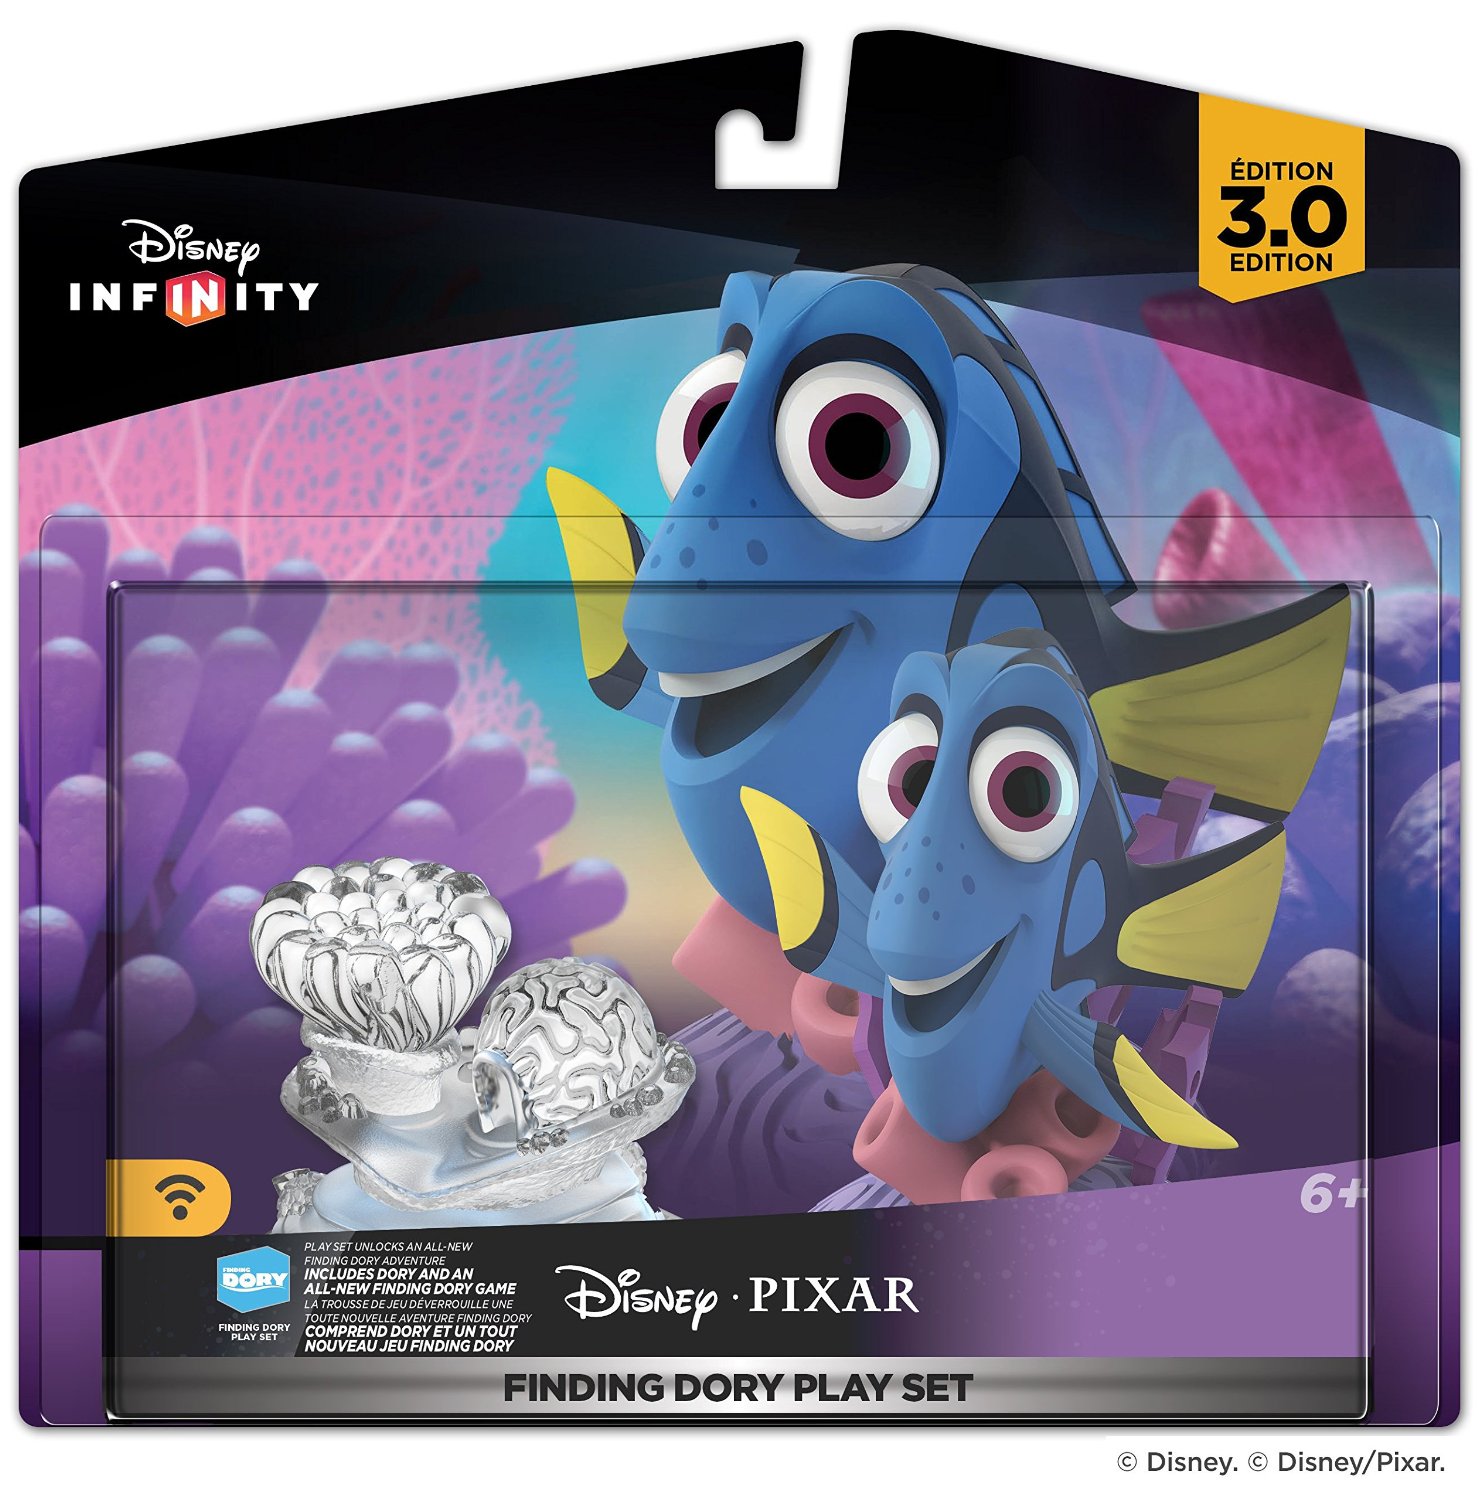 Disney Infinity 3.0 Edition: Finding Dory Play Set